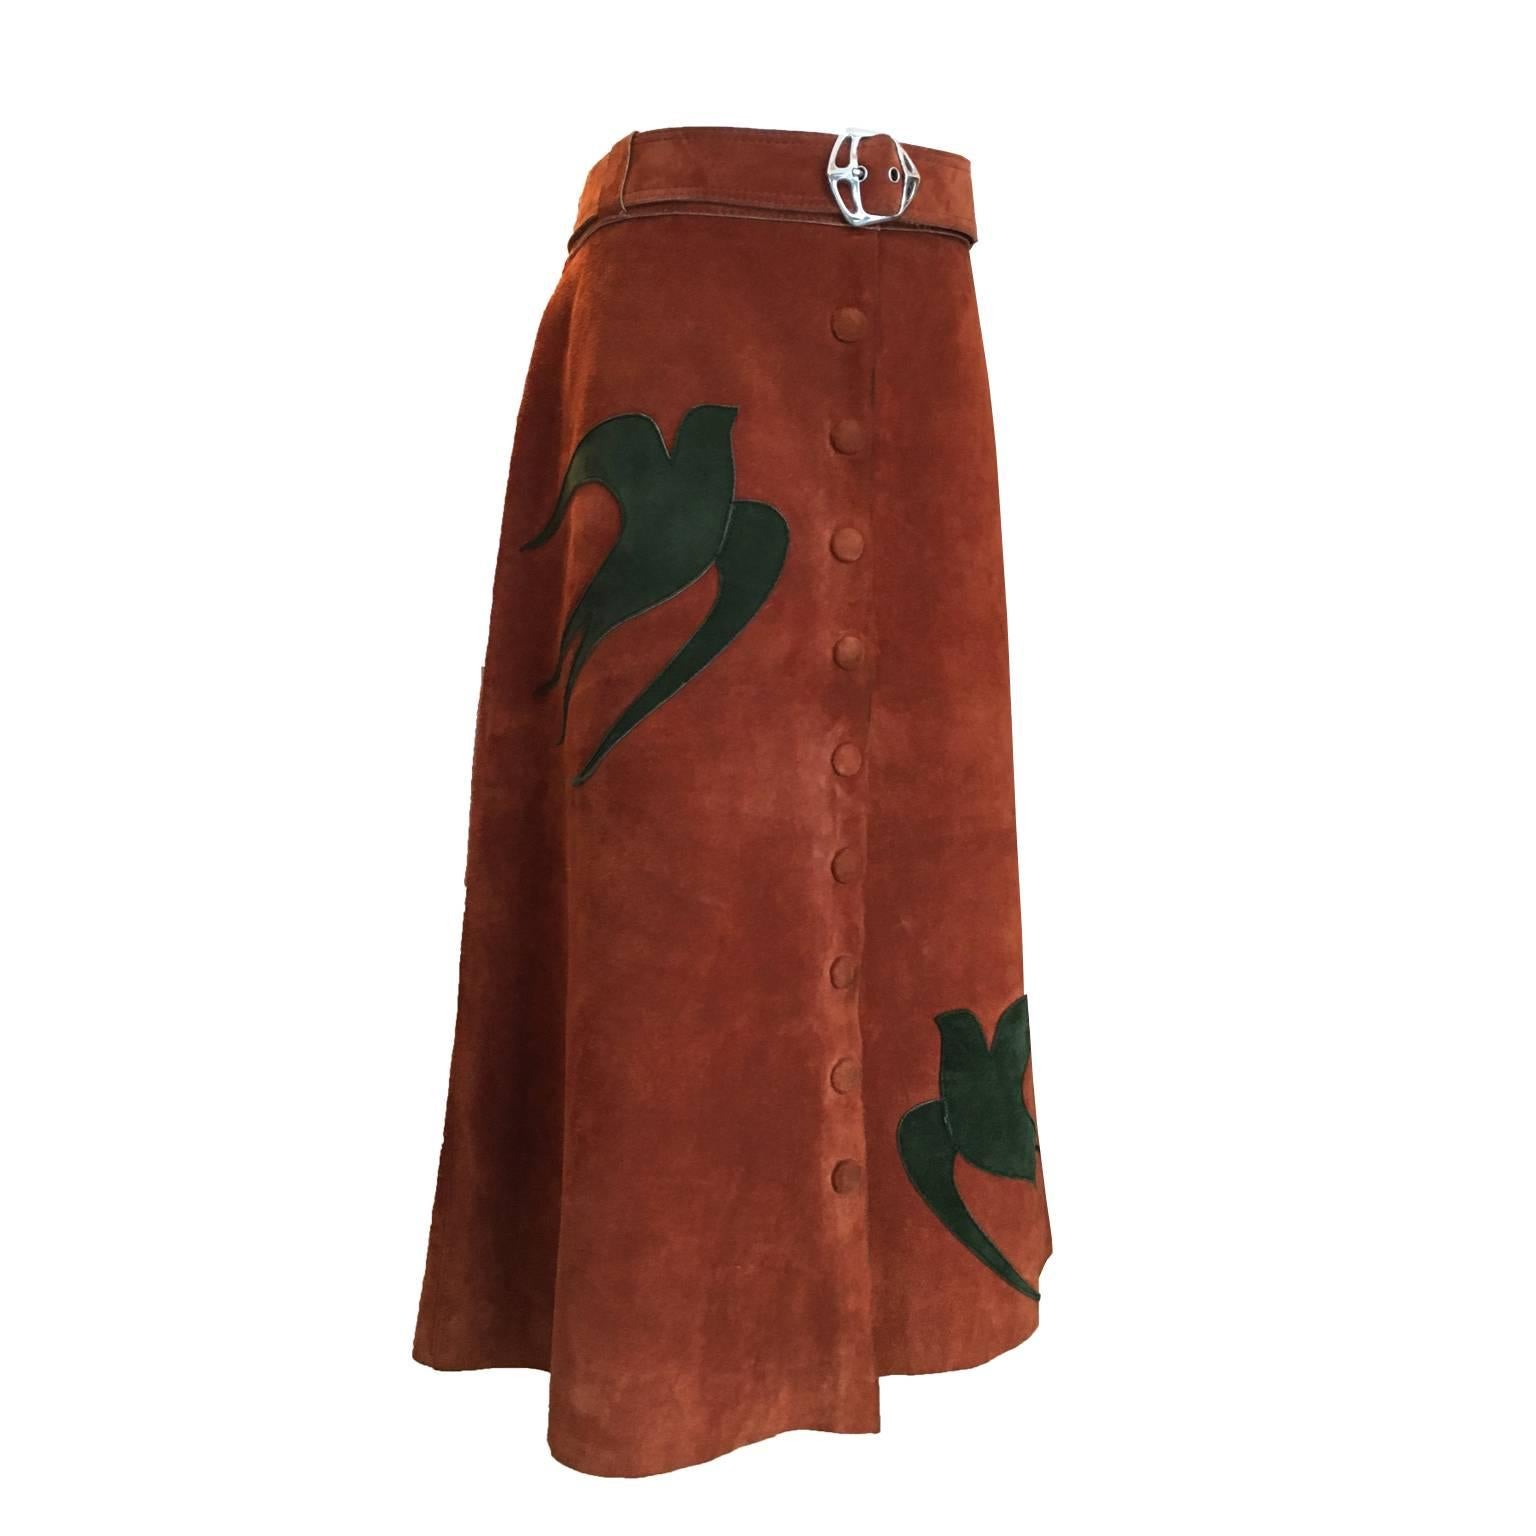 Maroon Suede Skirt Applique Swallows 1970s